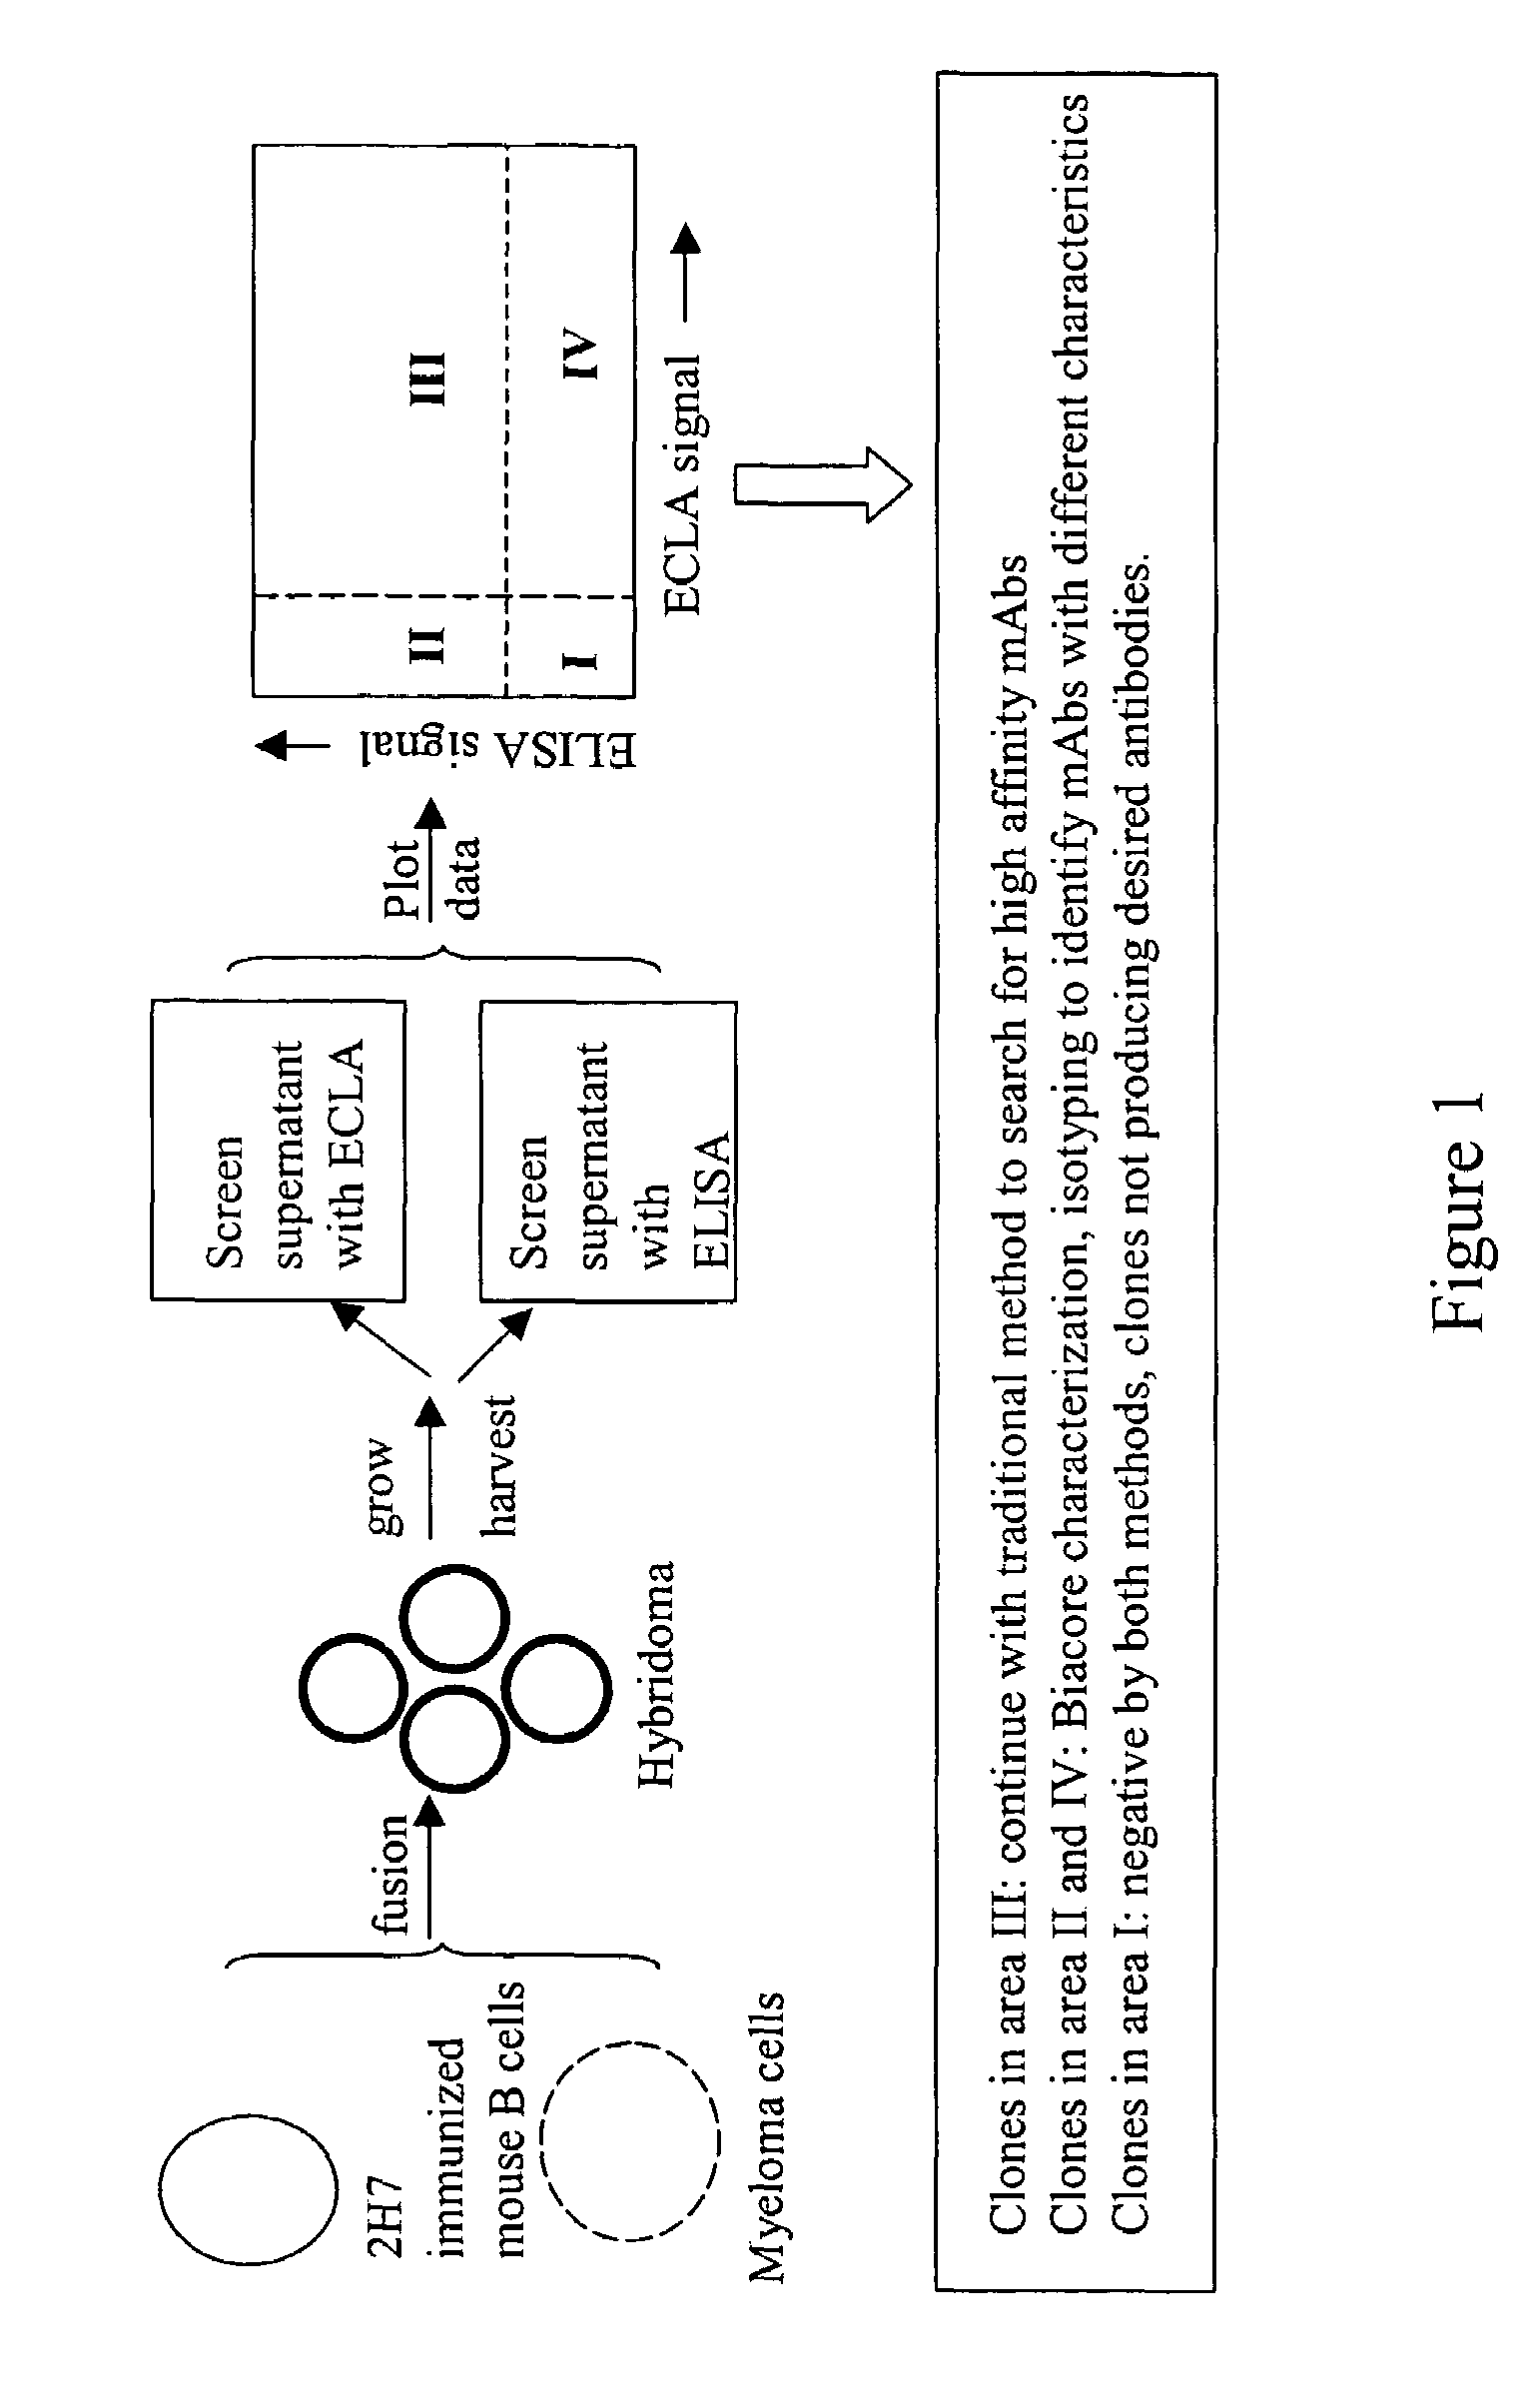 Cross-screening system and methods for detecting a molecule having binding affinity for a target molecule